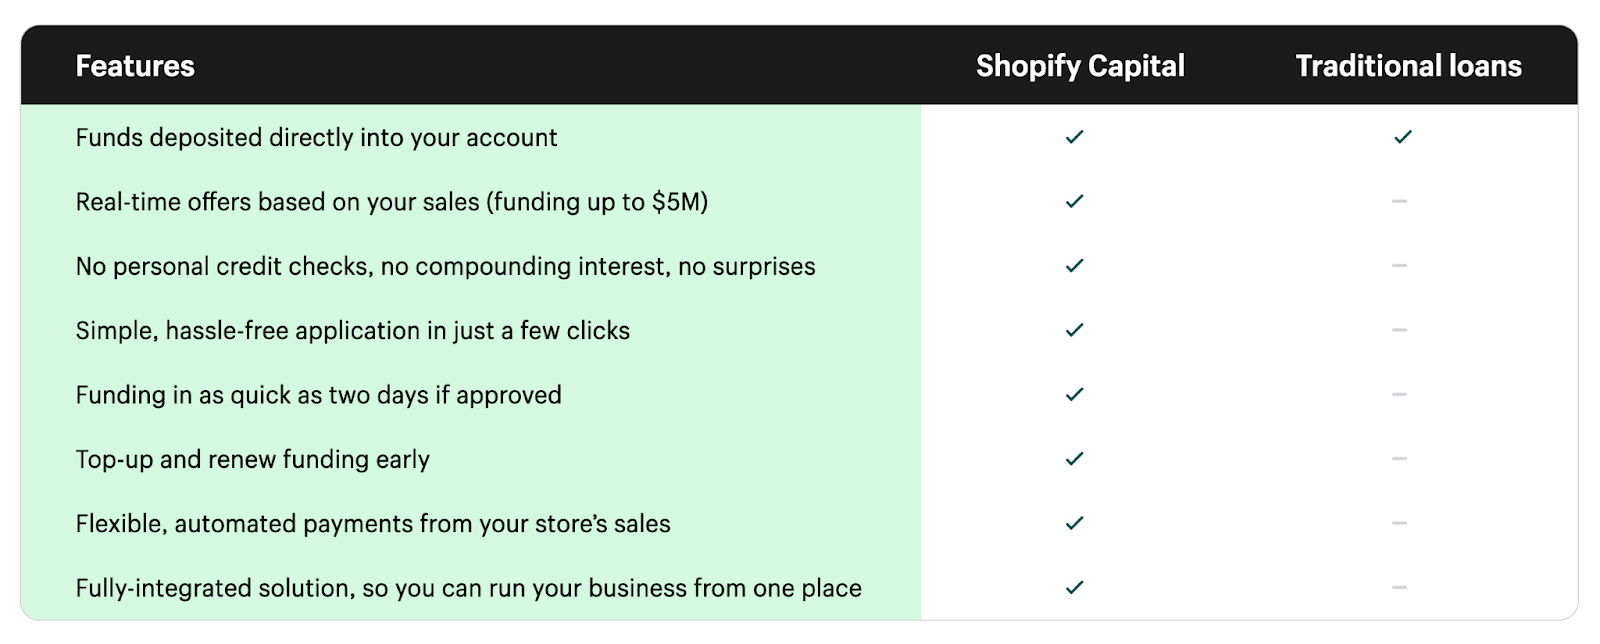 Shopify Capital loan overview